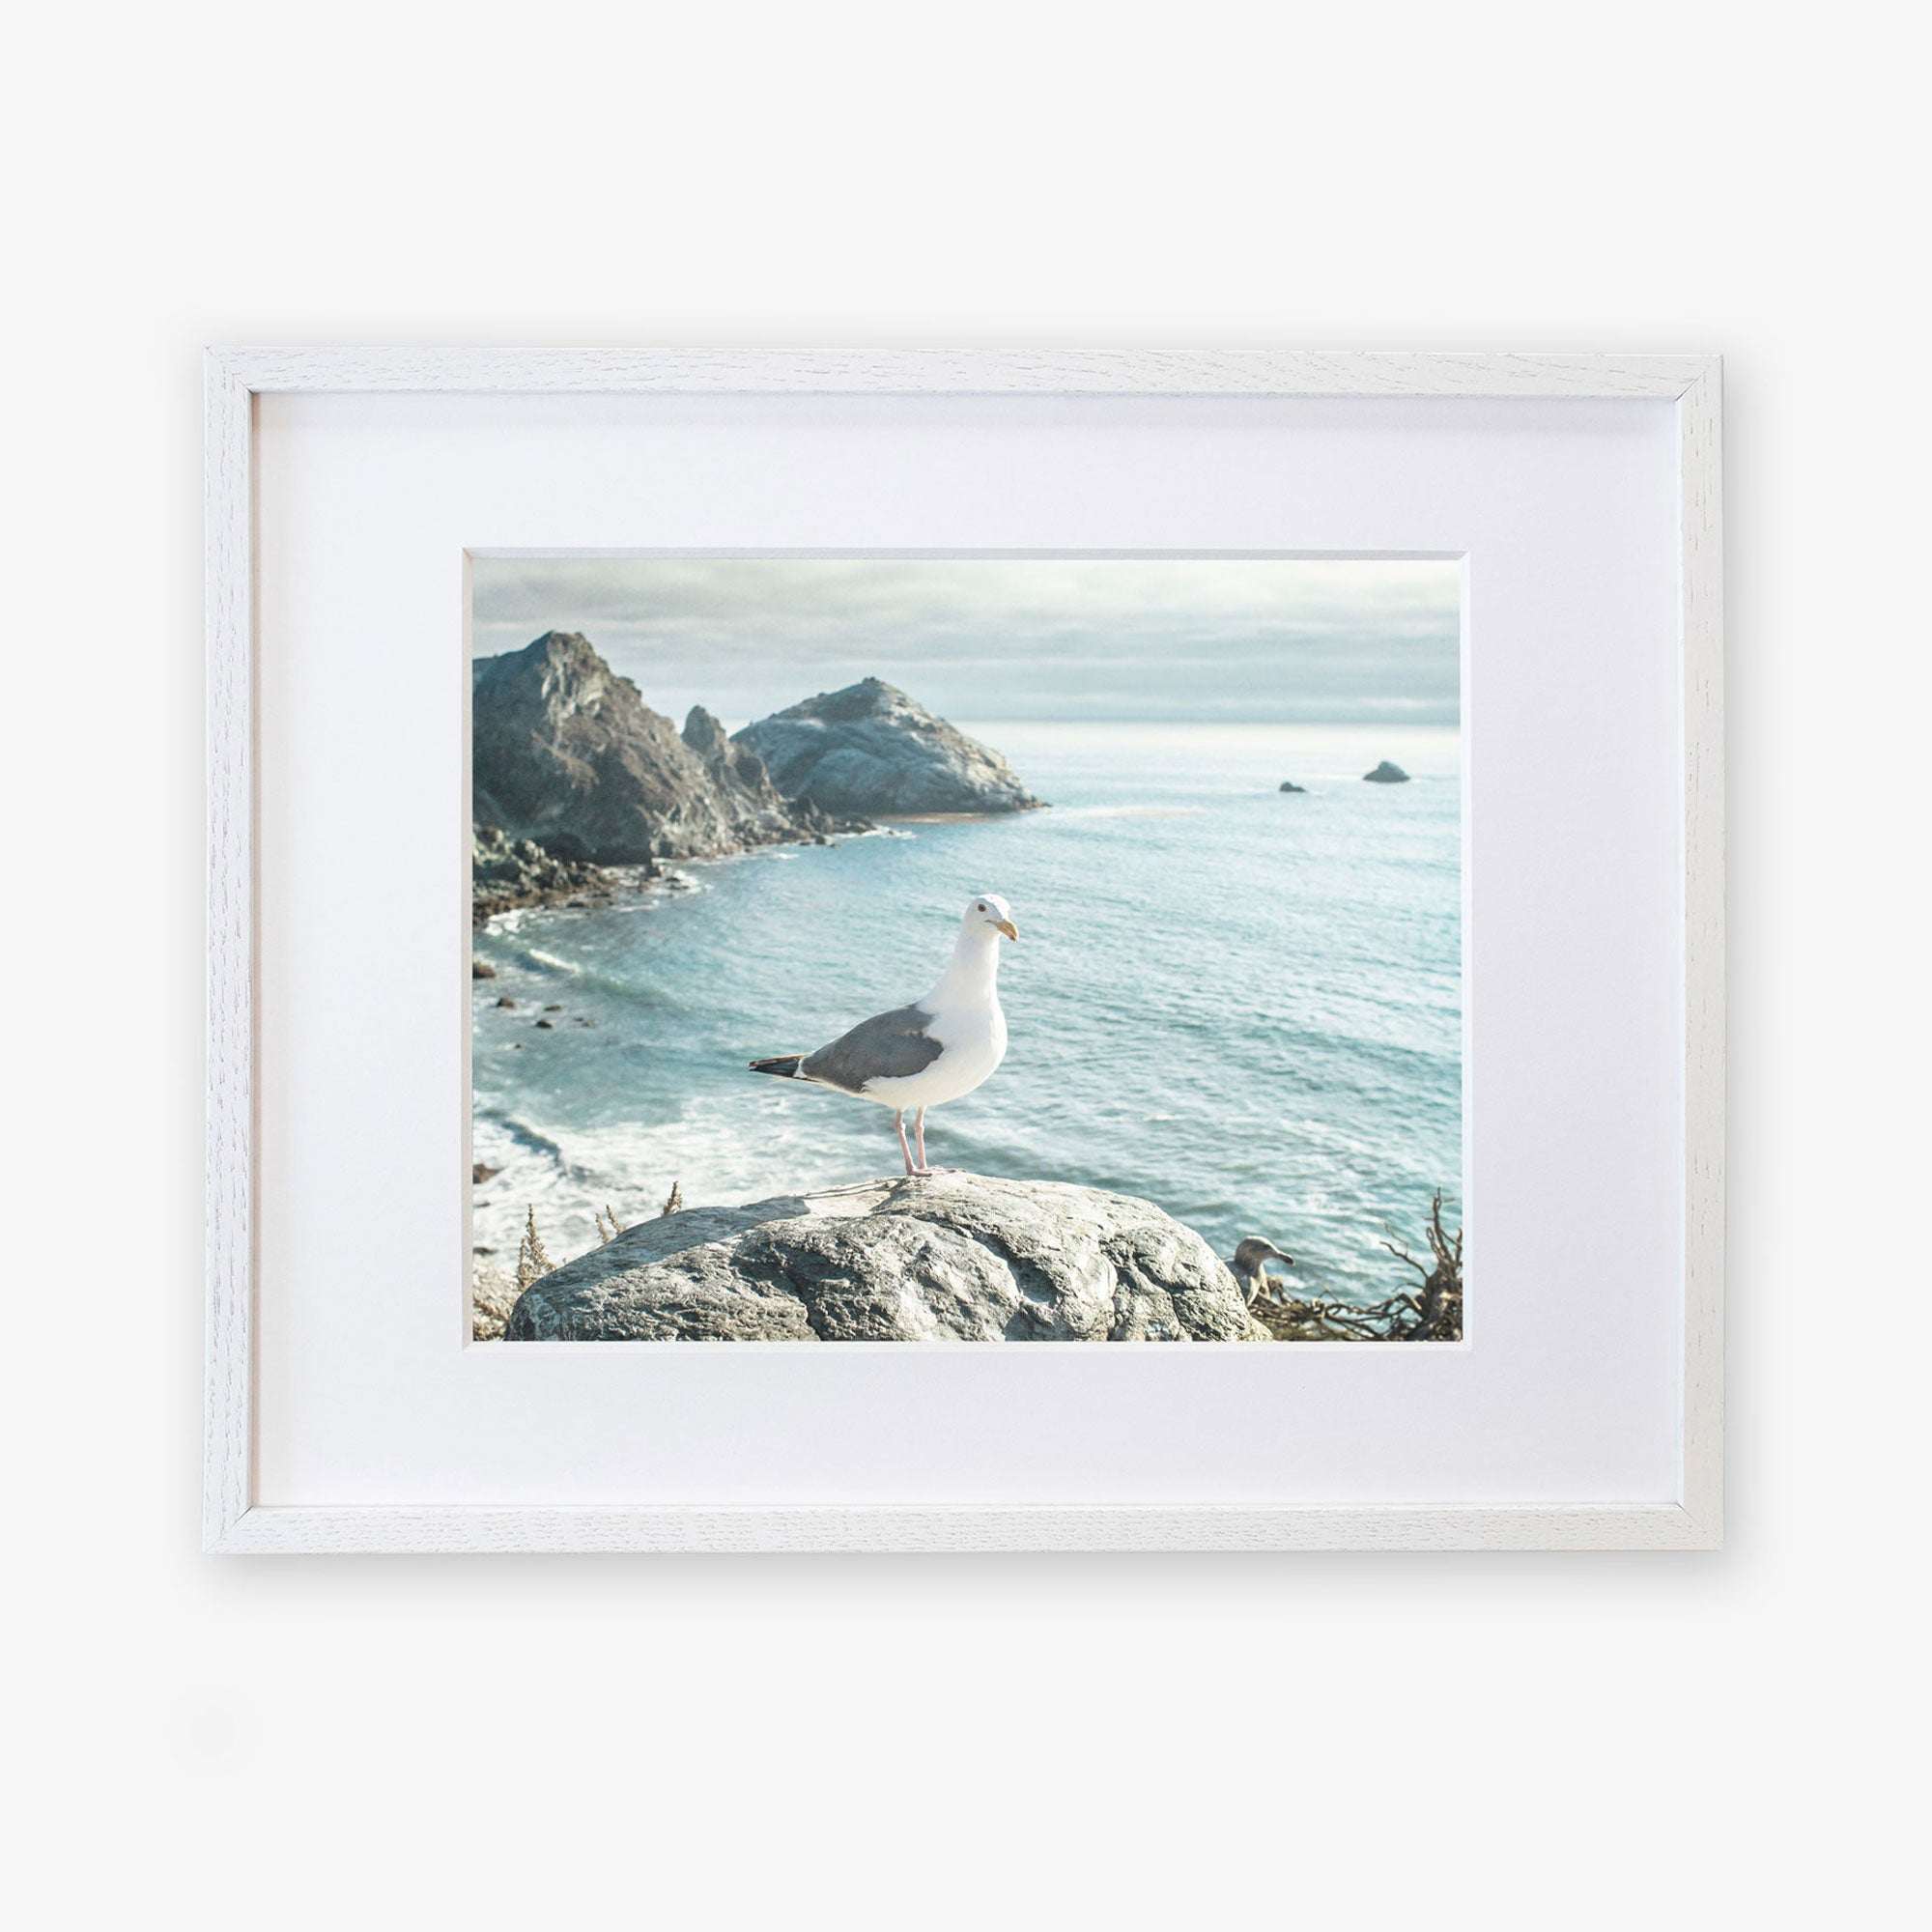 A framed photograph of a seagull standing on a rocky coast overlooking the ocean, with distant cliffs and calm sea visible in the background, printed on archival photographic paper. Offley Green&#39;s Big Sur Landscape Print, &#39;Lobster Mornay For Tea&#39; displays stunning coastal scenery.